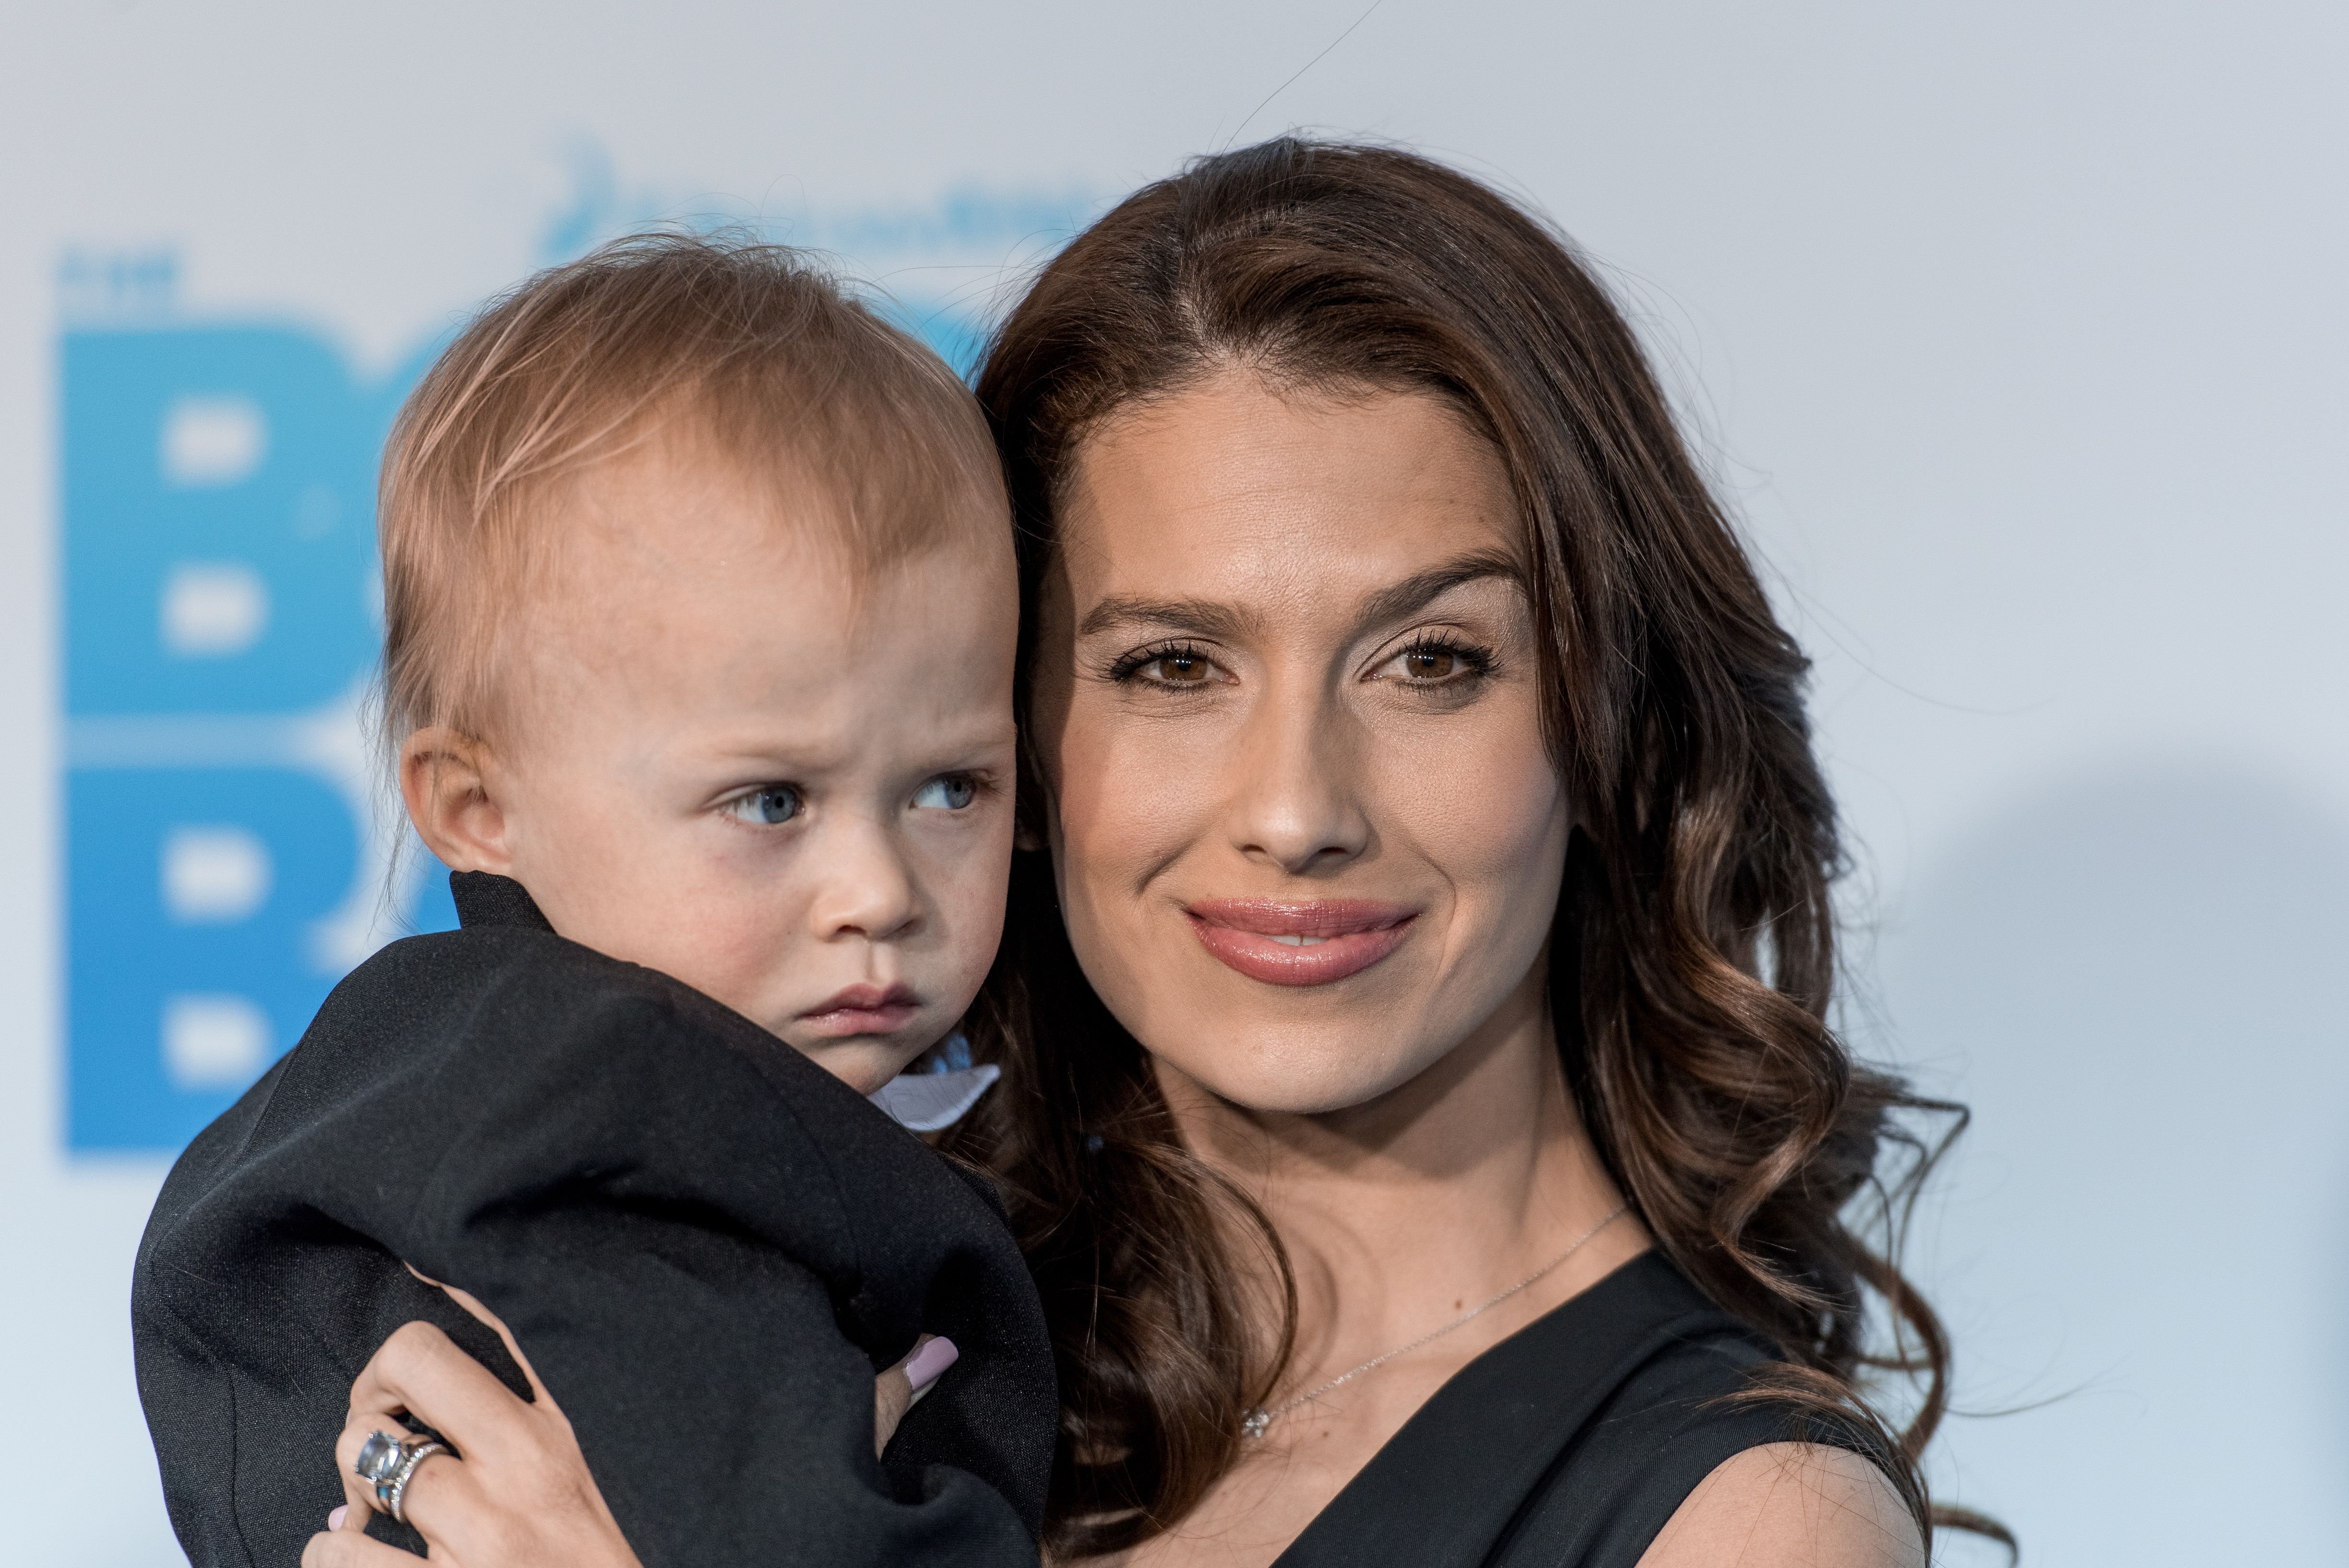 Rafael Thomas Baldwin carried by Hilaria Baldwin at "The Boss Baby" New York Premiere at AMC Loews Lincoln Square 13 theater on March 20, 2017 in New York City. | Source: Getty Images